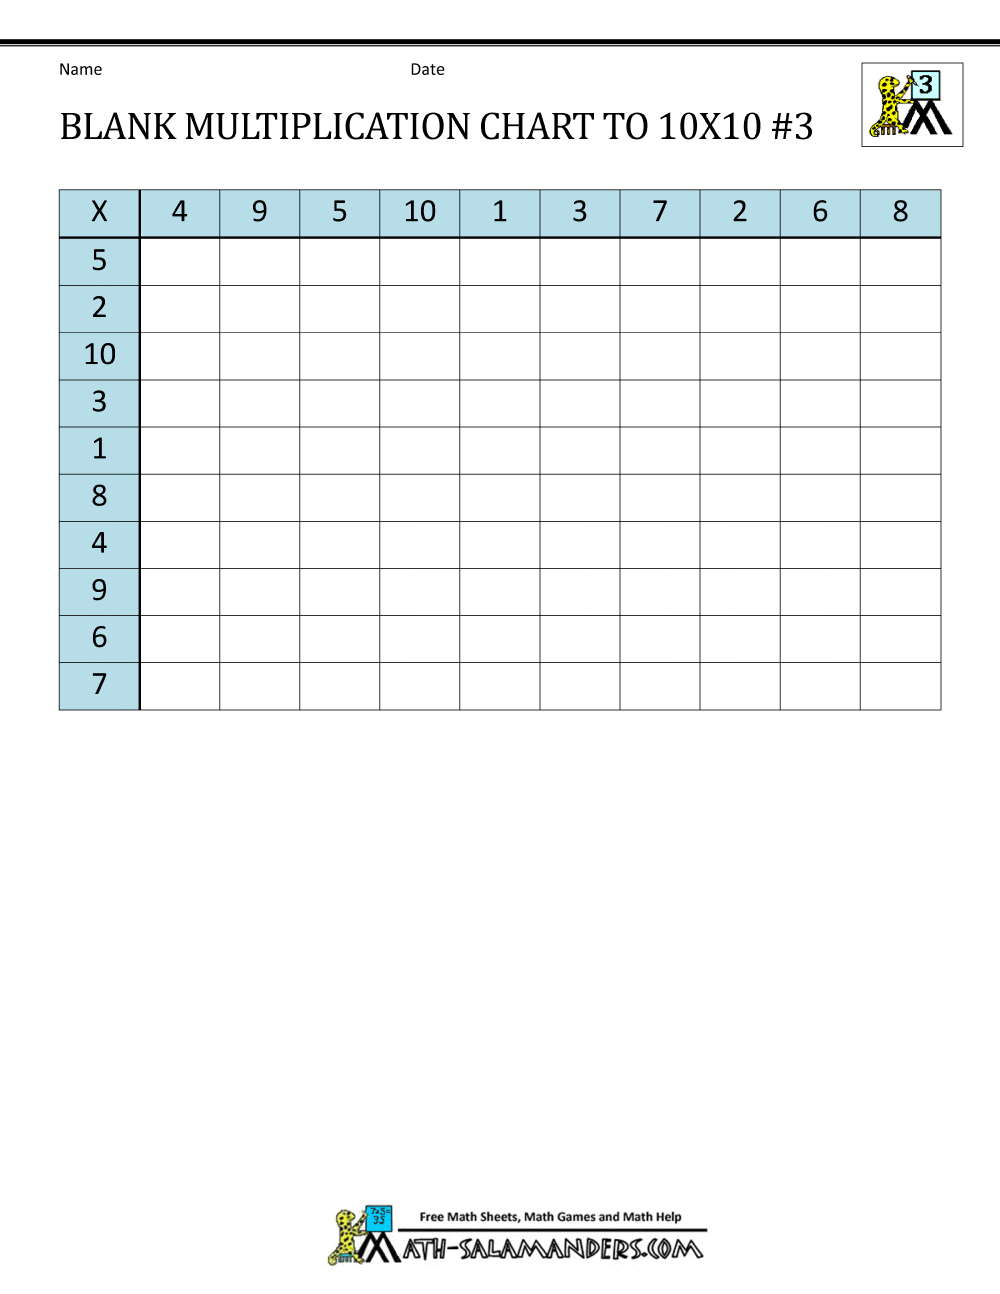 blank-multiplication-chart-up-to-10x10